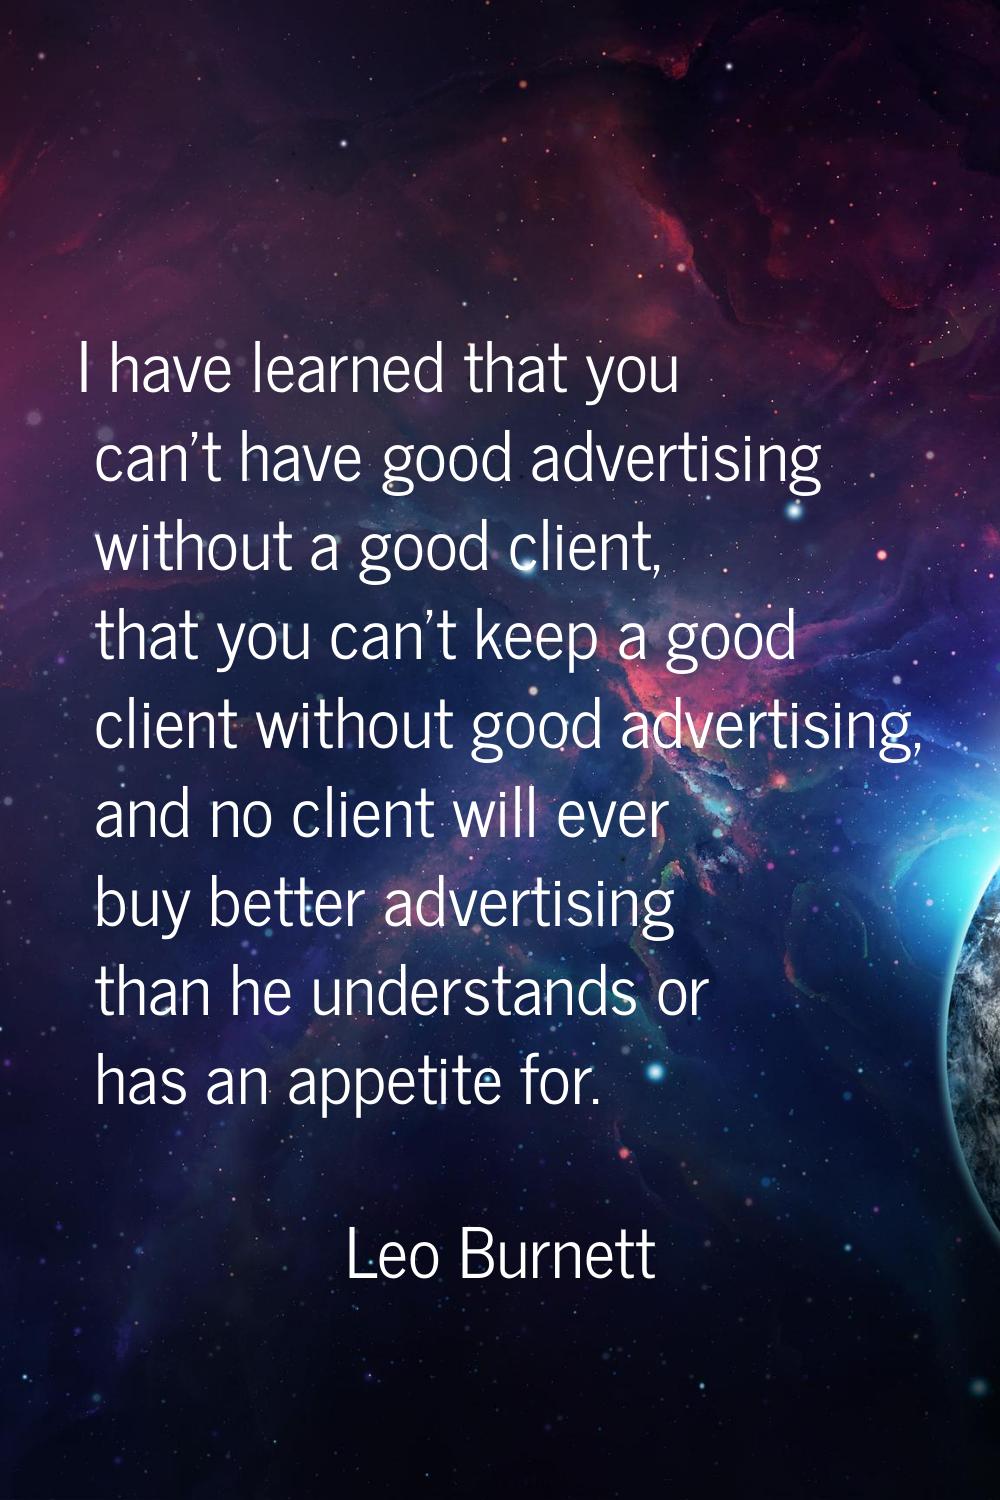 I have learned that you can't have good advertising without a good client, that you can't keep a go